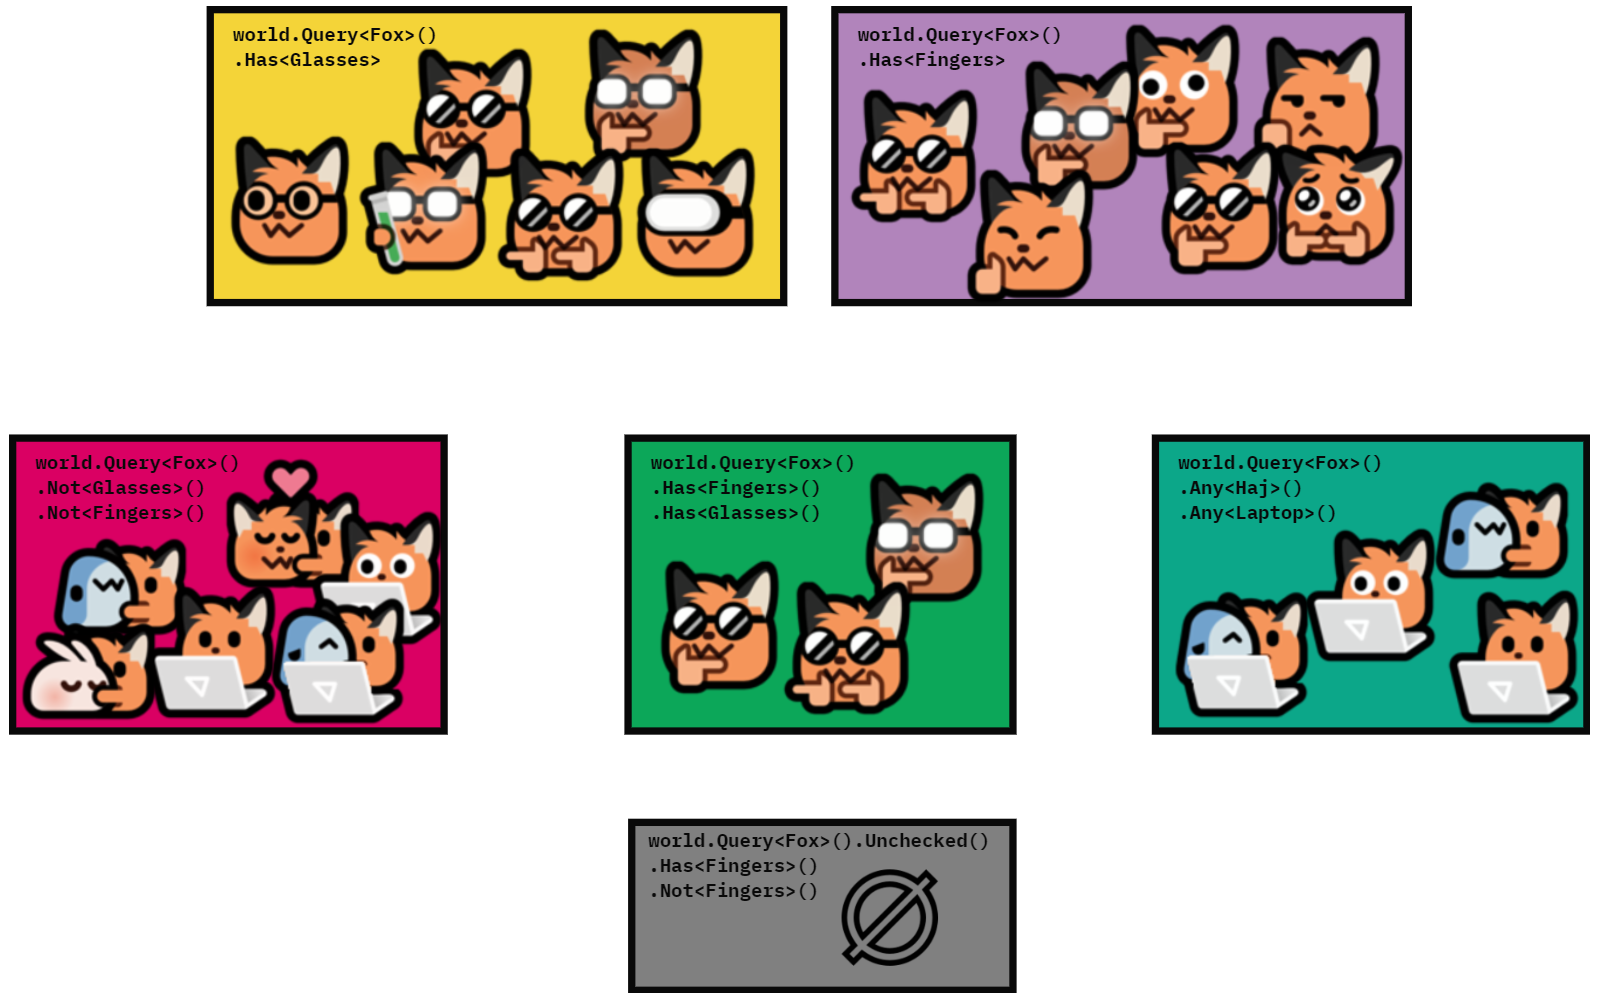 Query Visualization: fox emojis with various traits grouped by common traits in several colored boxes